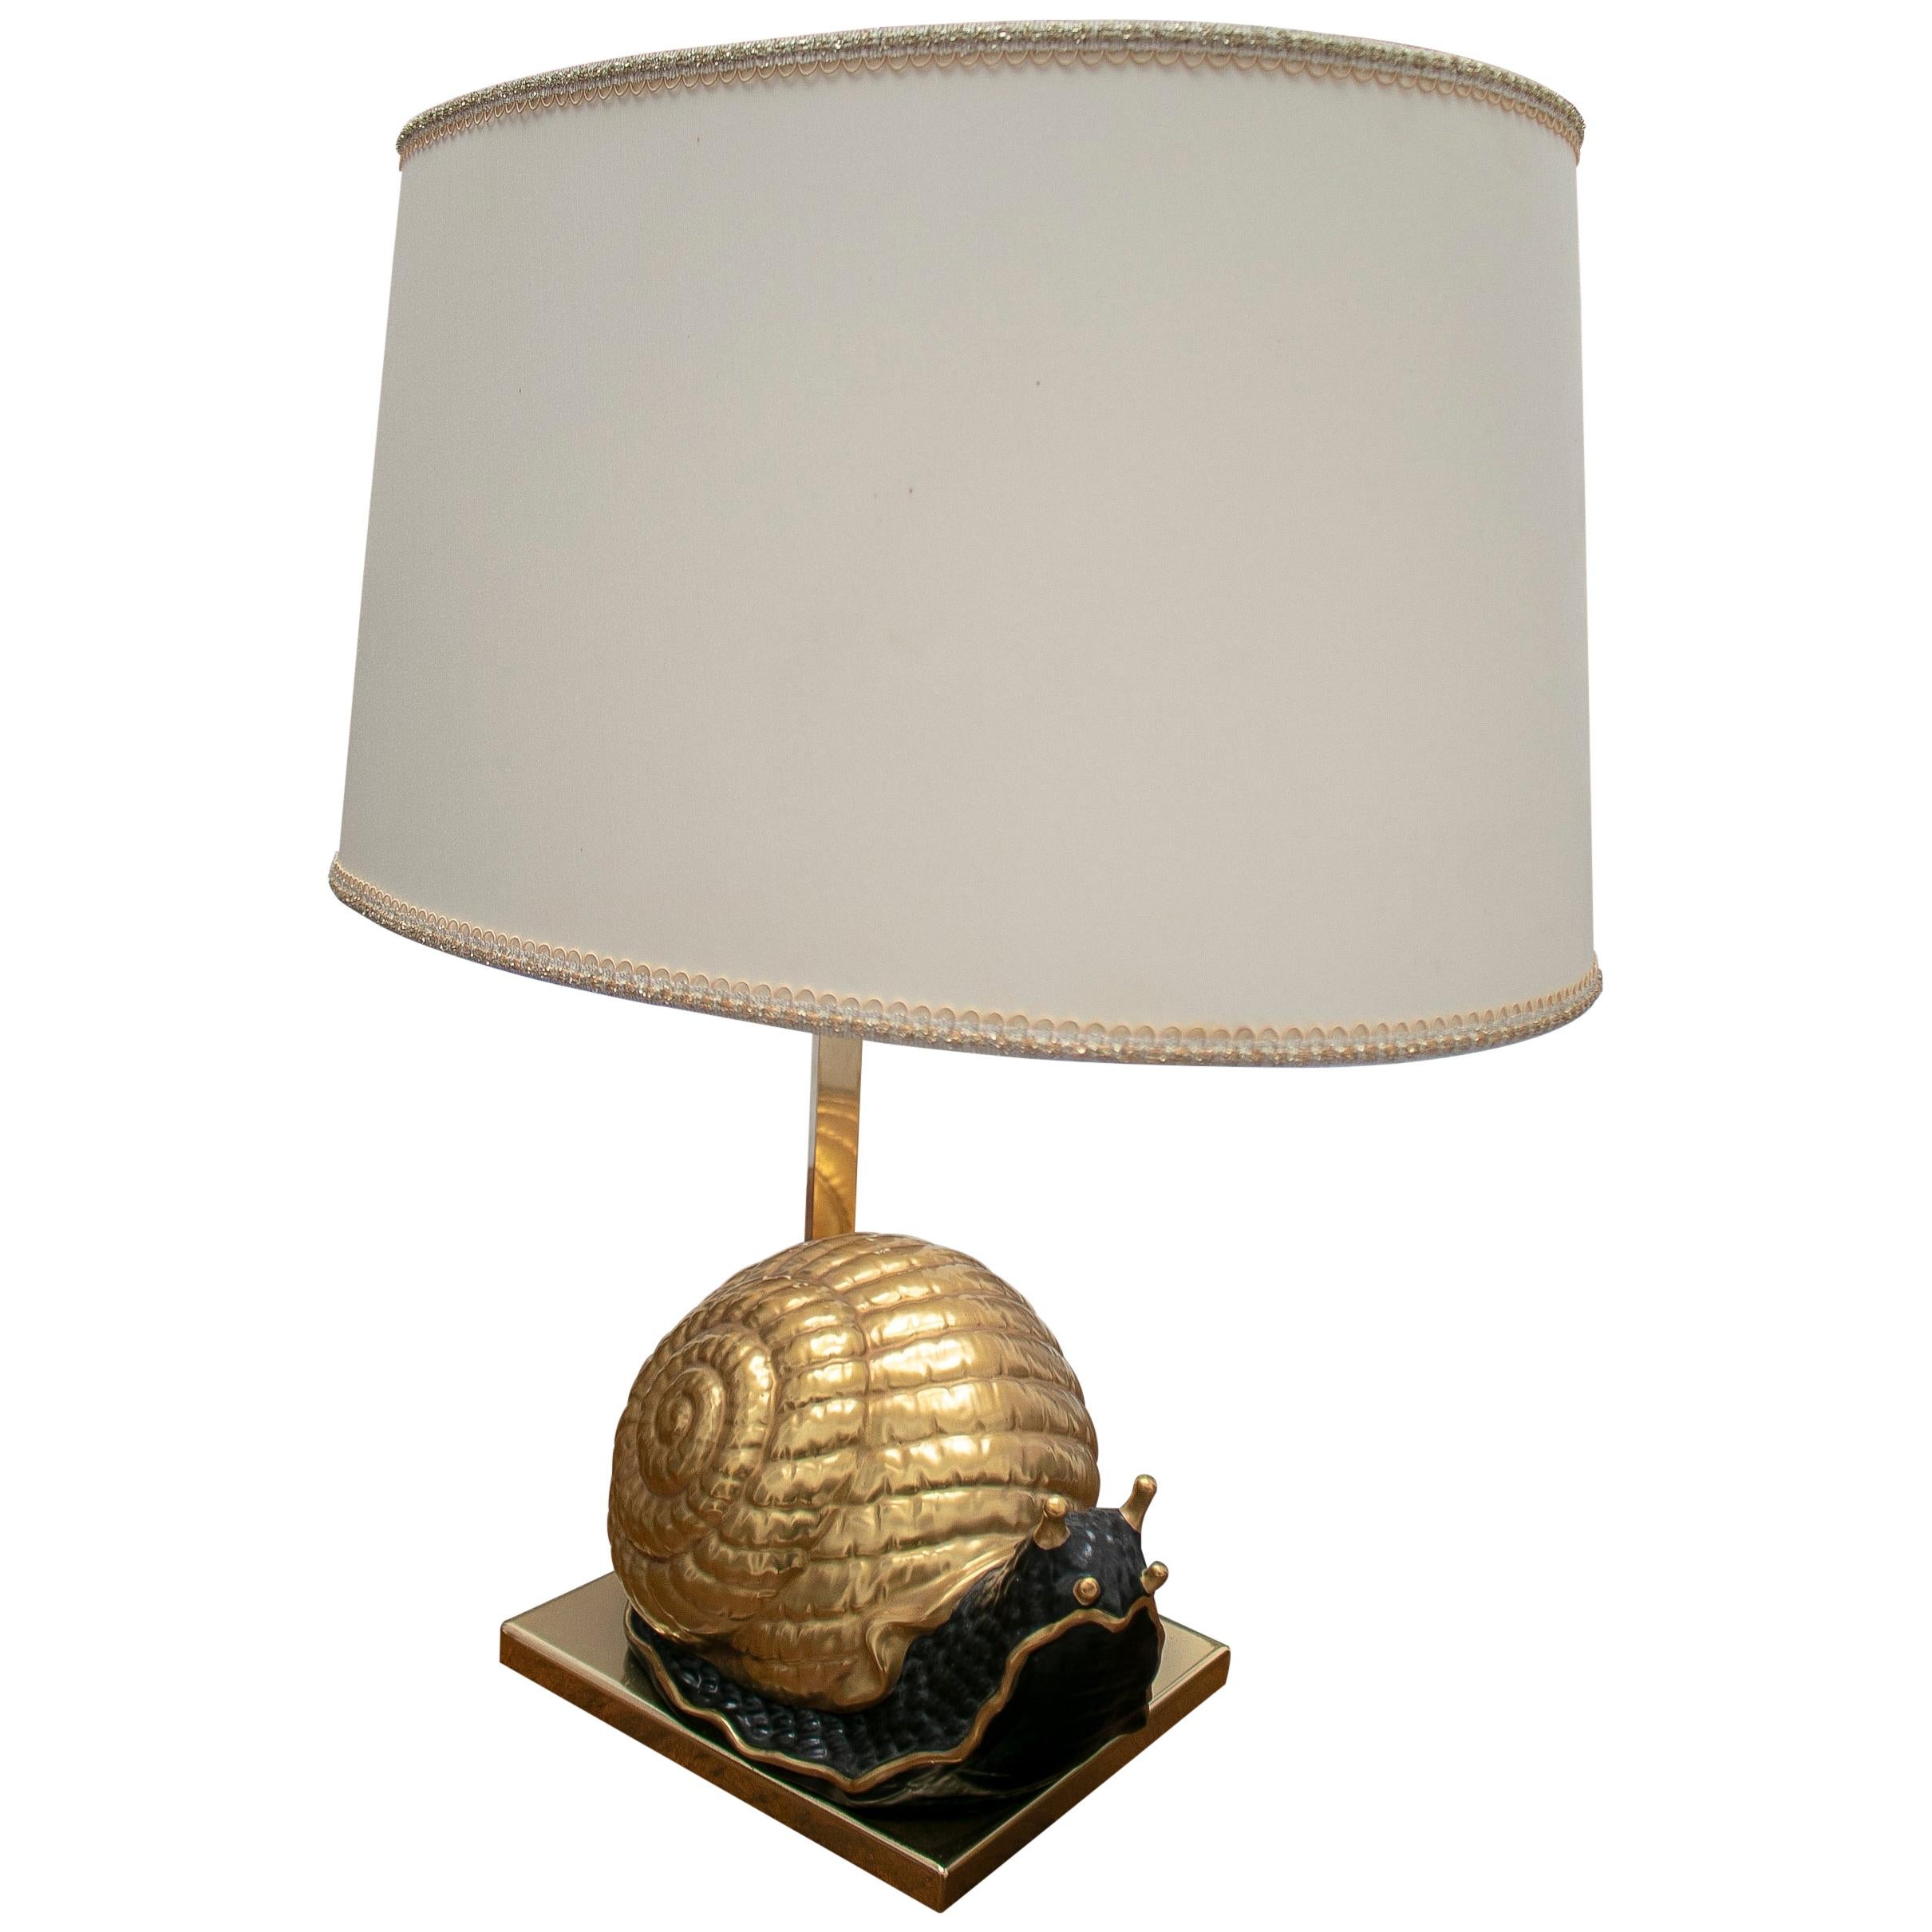 1950s European Snail Shaped Terracotta Lamp with Bronze Base and Shade